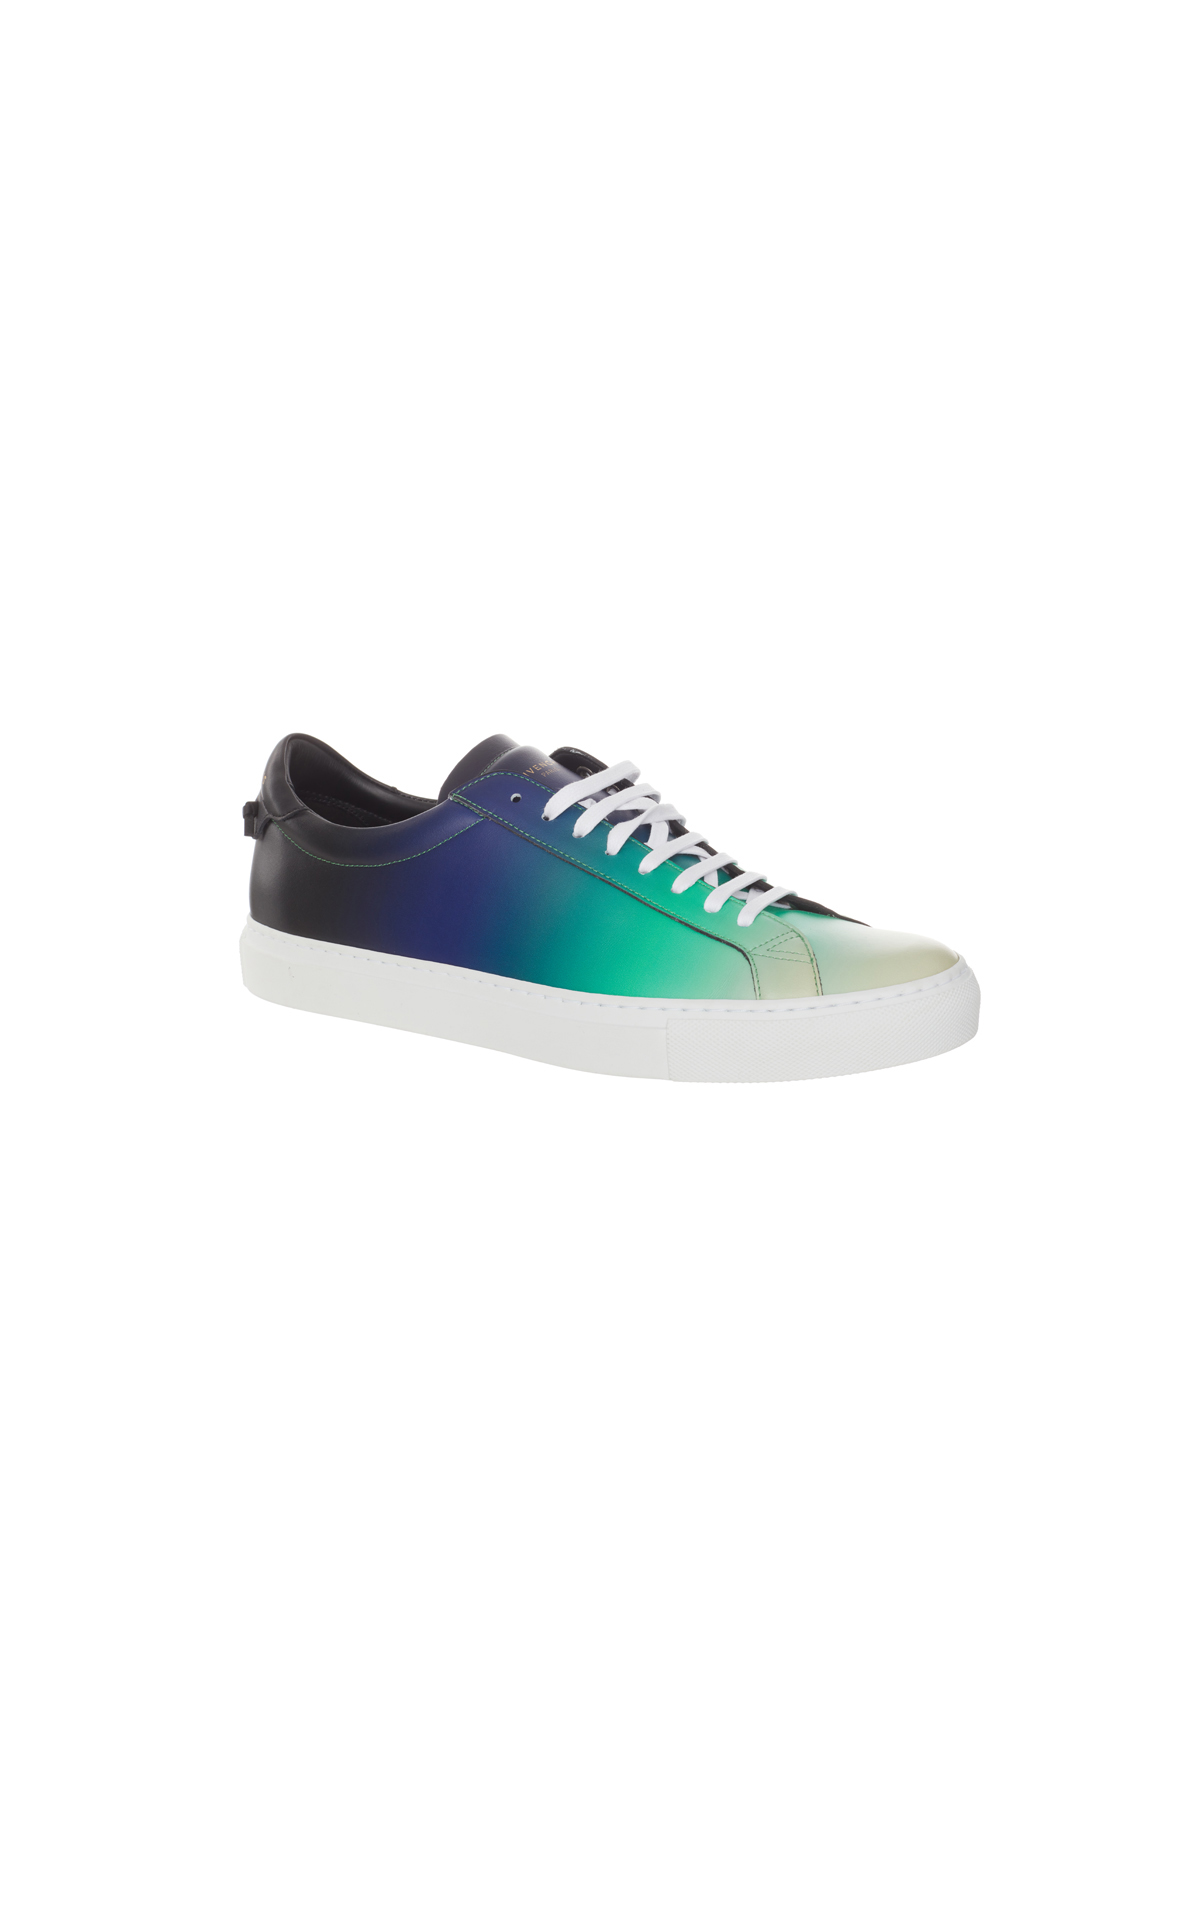 Givenchy Urban street sneaker blue and green from Bicester Village